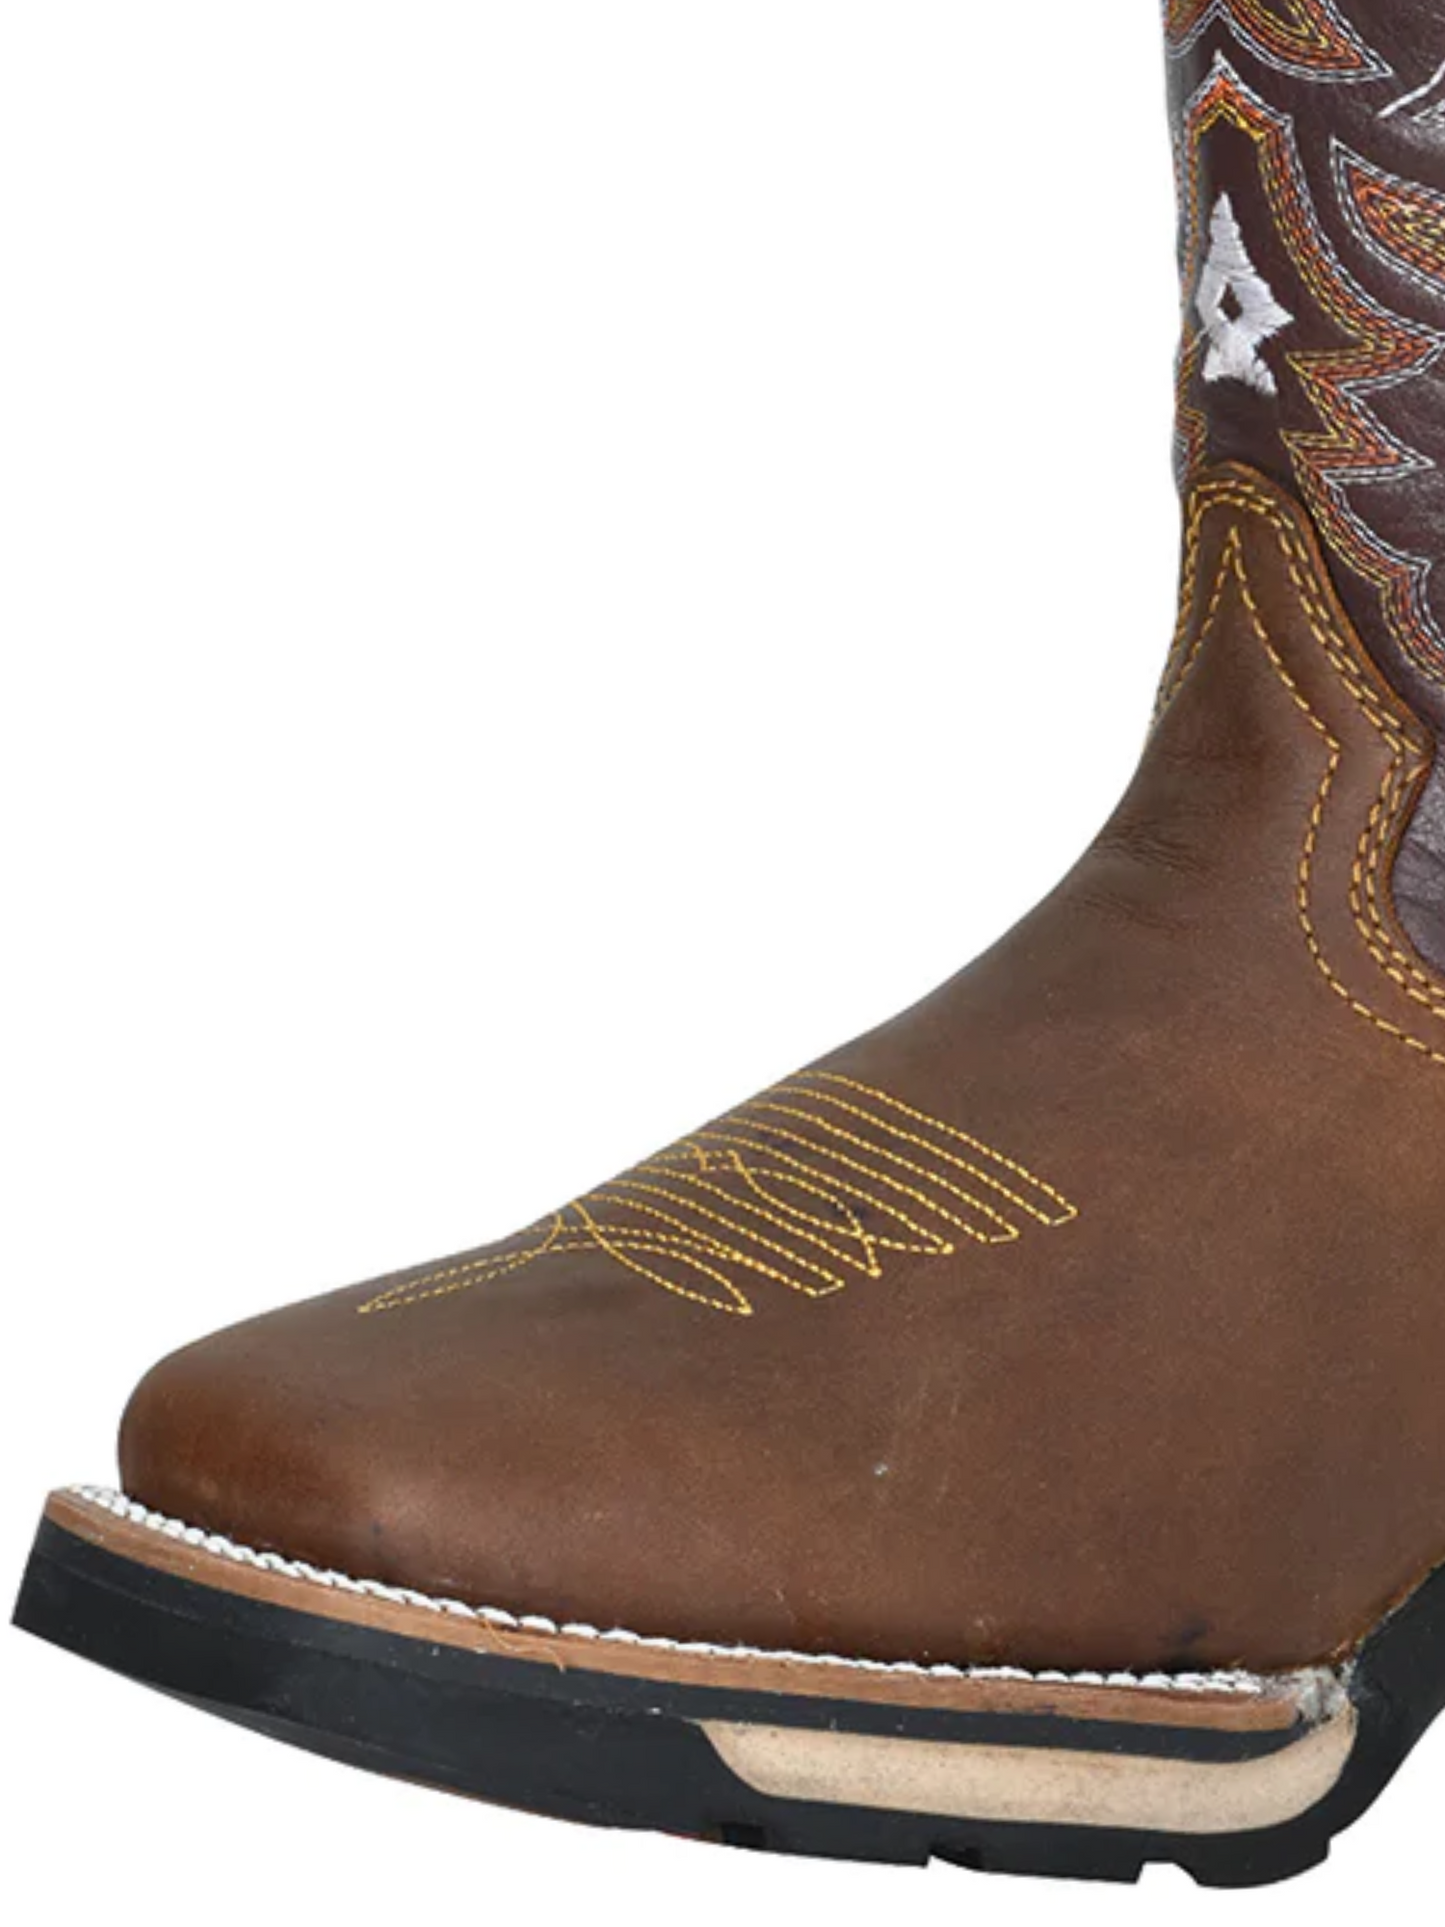 Men's Genuine Leather Soft Toe Pull-On Tube Rodeo Work Boots 'Buffalo' - ID: 123730 Work Boots Buffalo